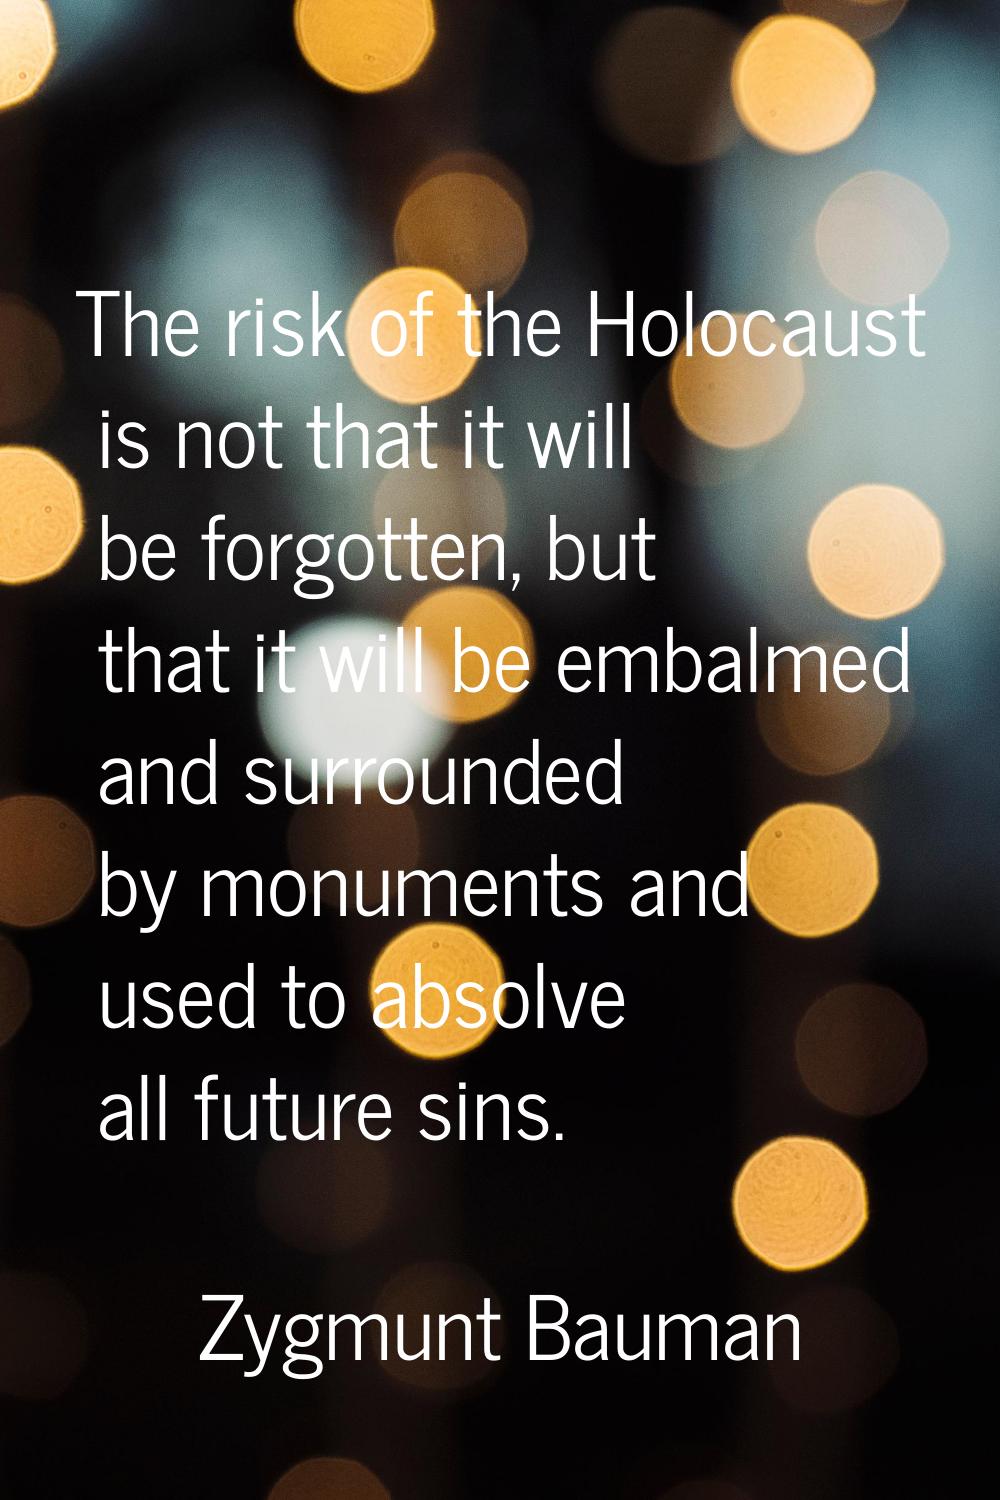 The risk of the Holocaust is not that it will be forgotten, but that it will be embalmed and surrou